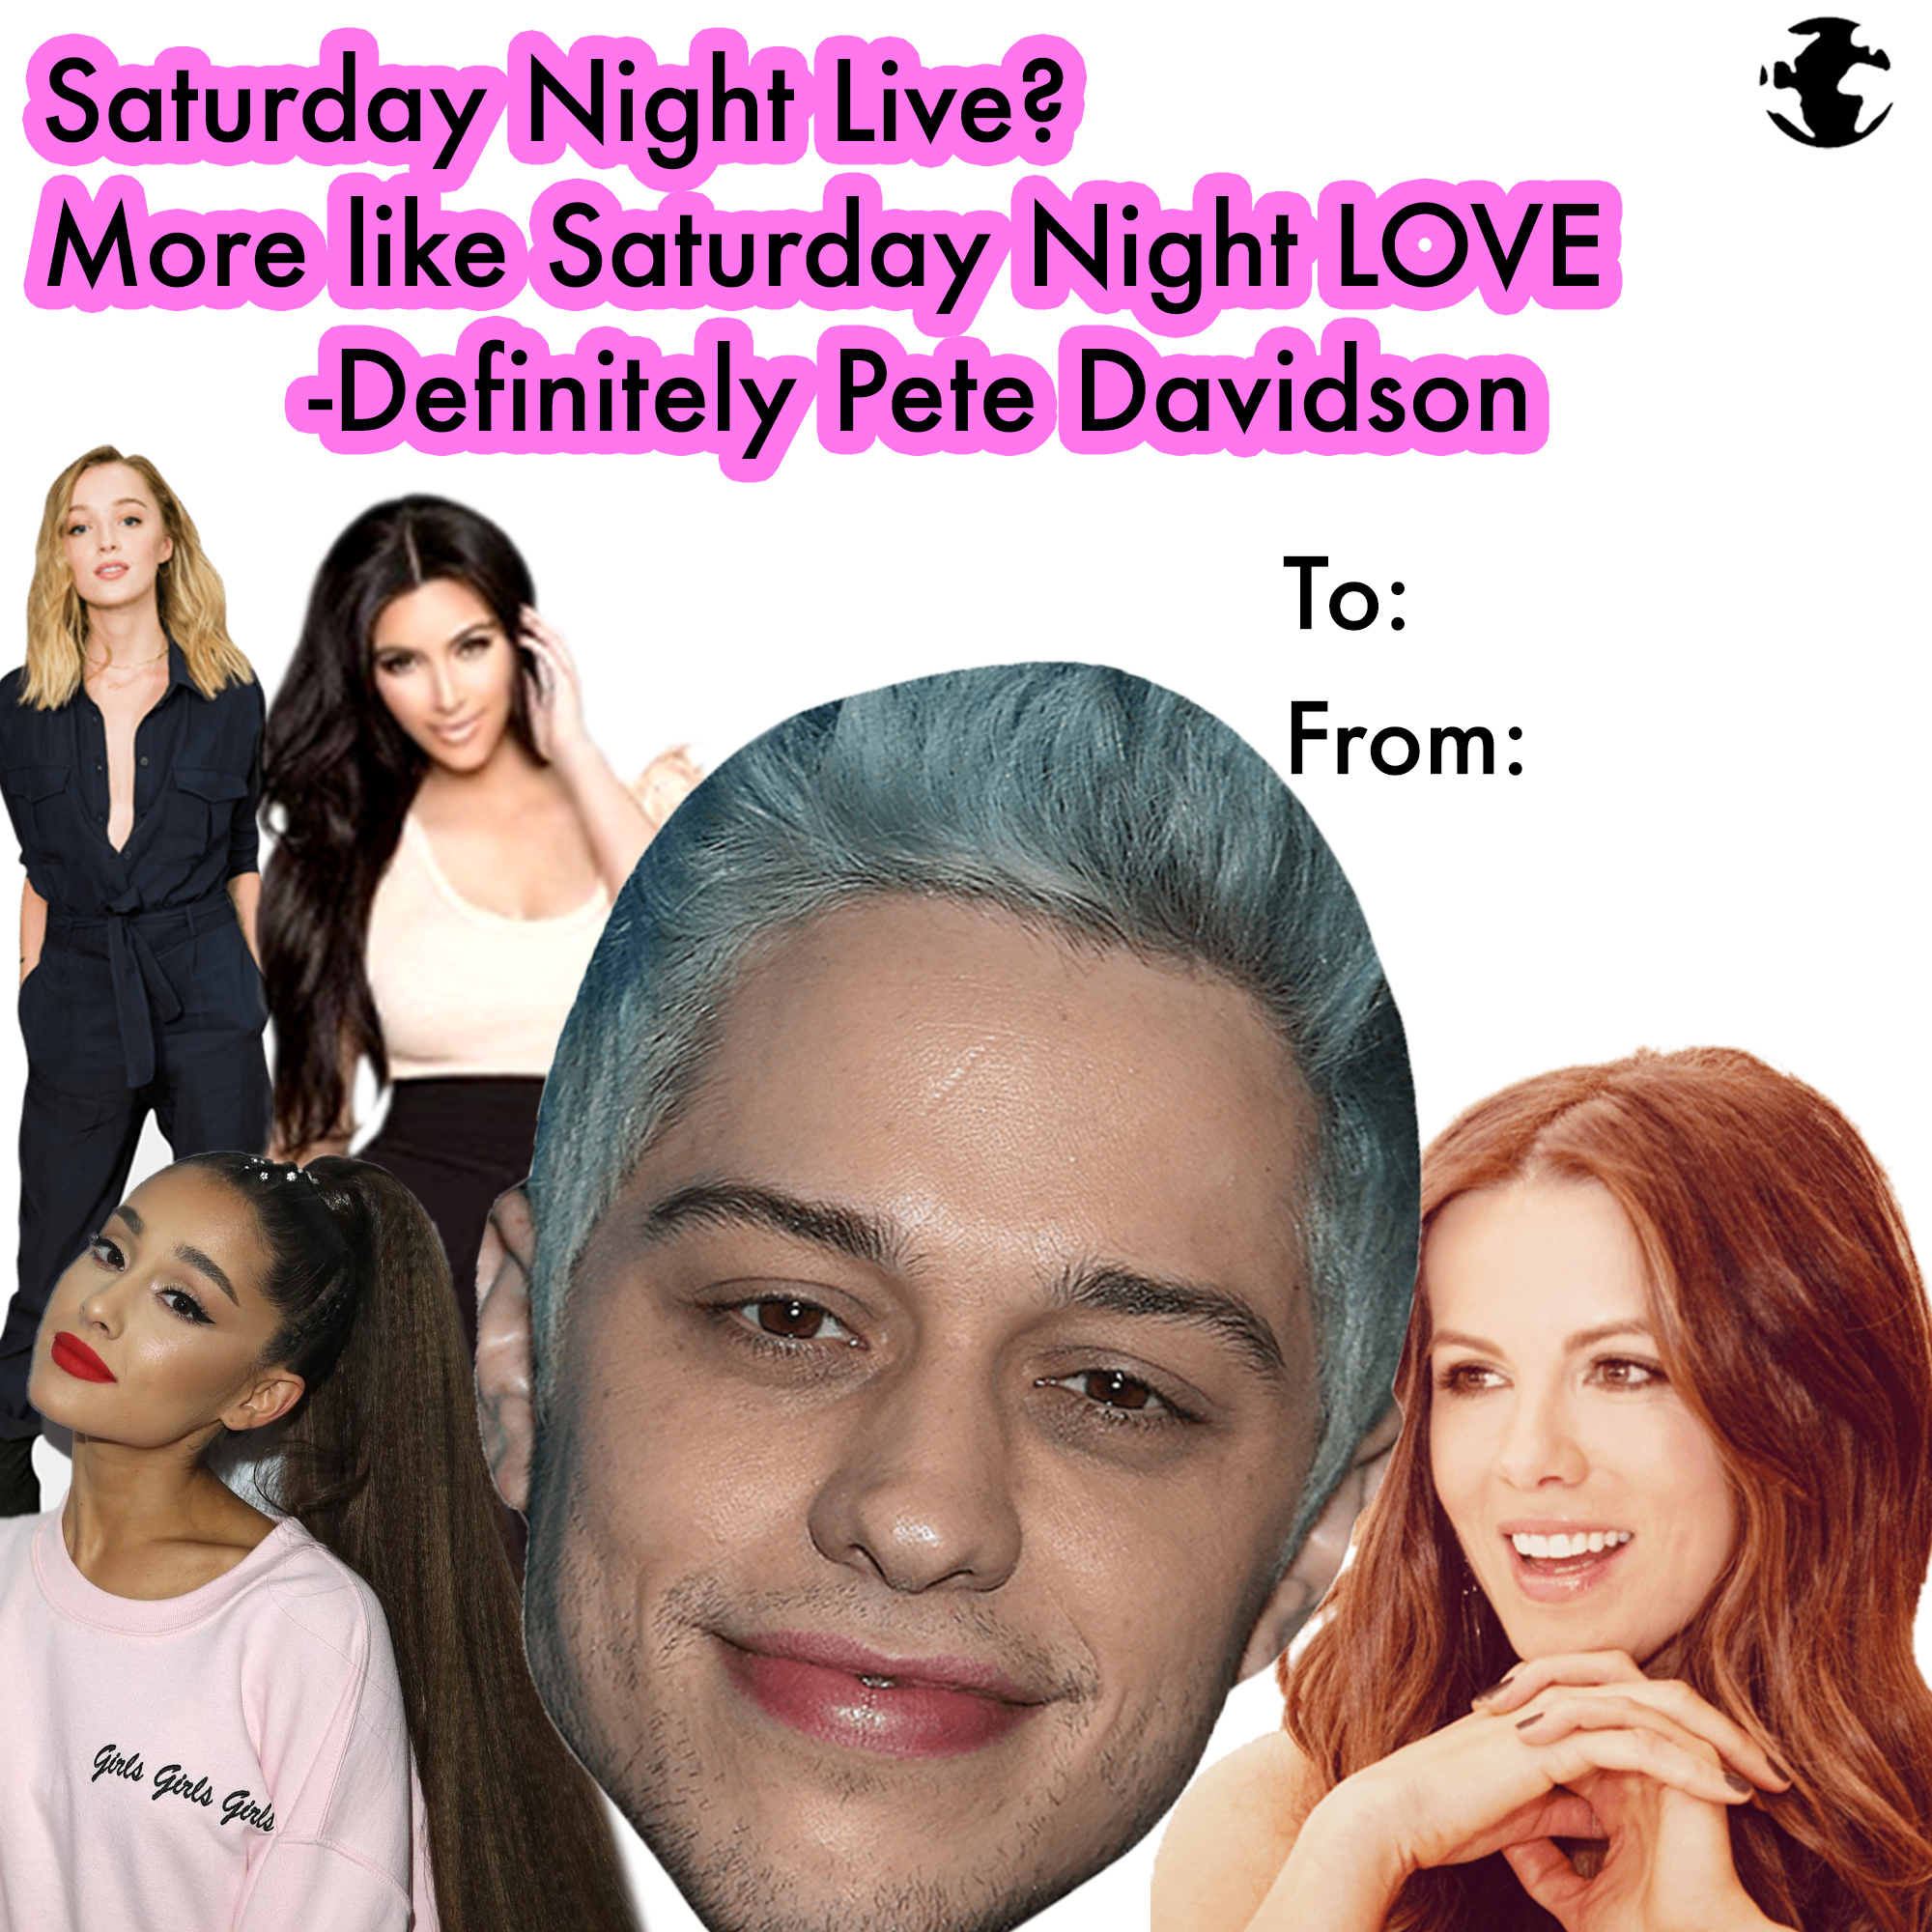 eBaum's Valentine's Day Cards 2022 - ti quotes - 3 Saturday Night Live More Saturday Night Love Definitely Pete Davidson To From Gots Gerle Gre